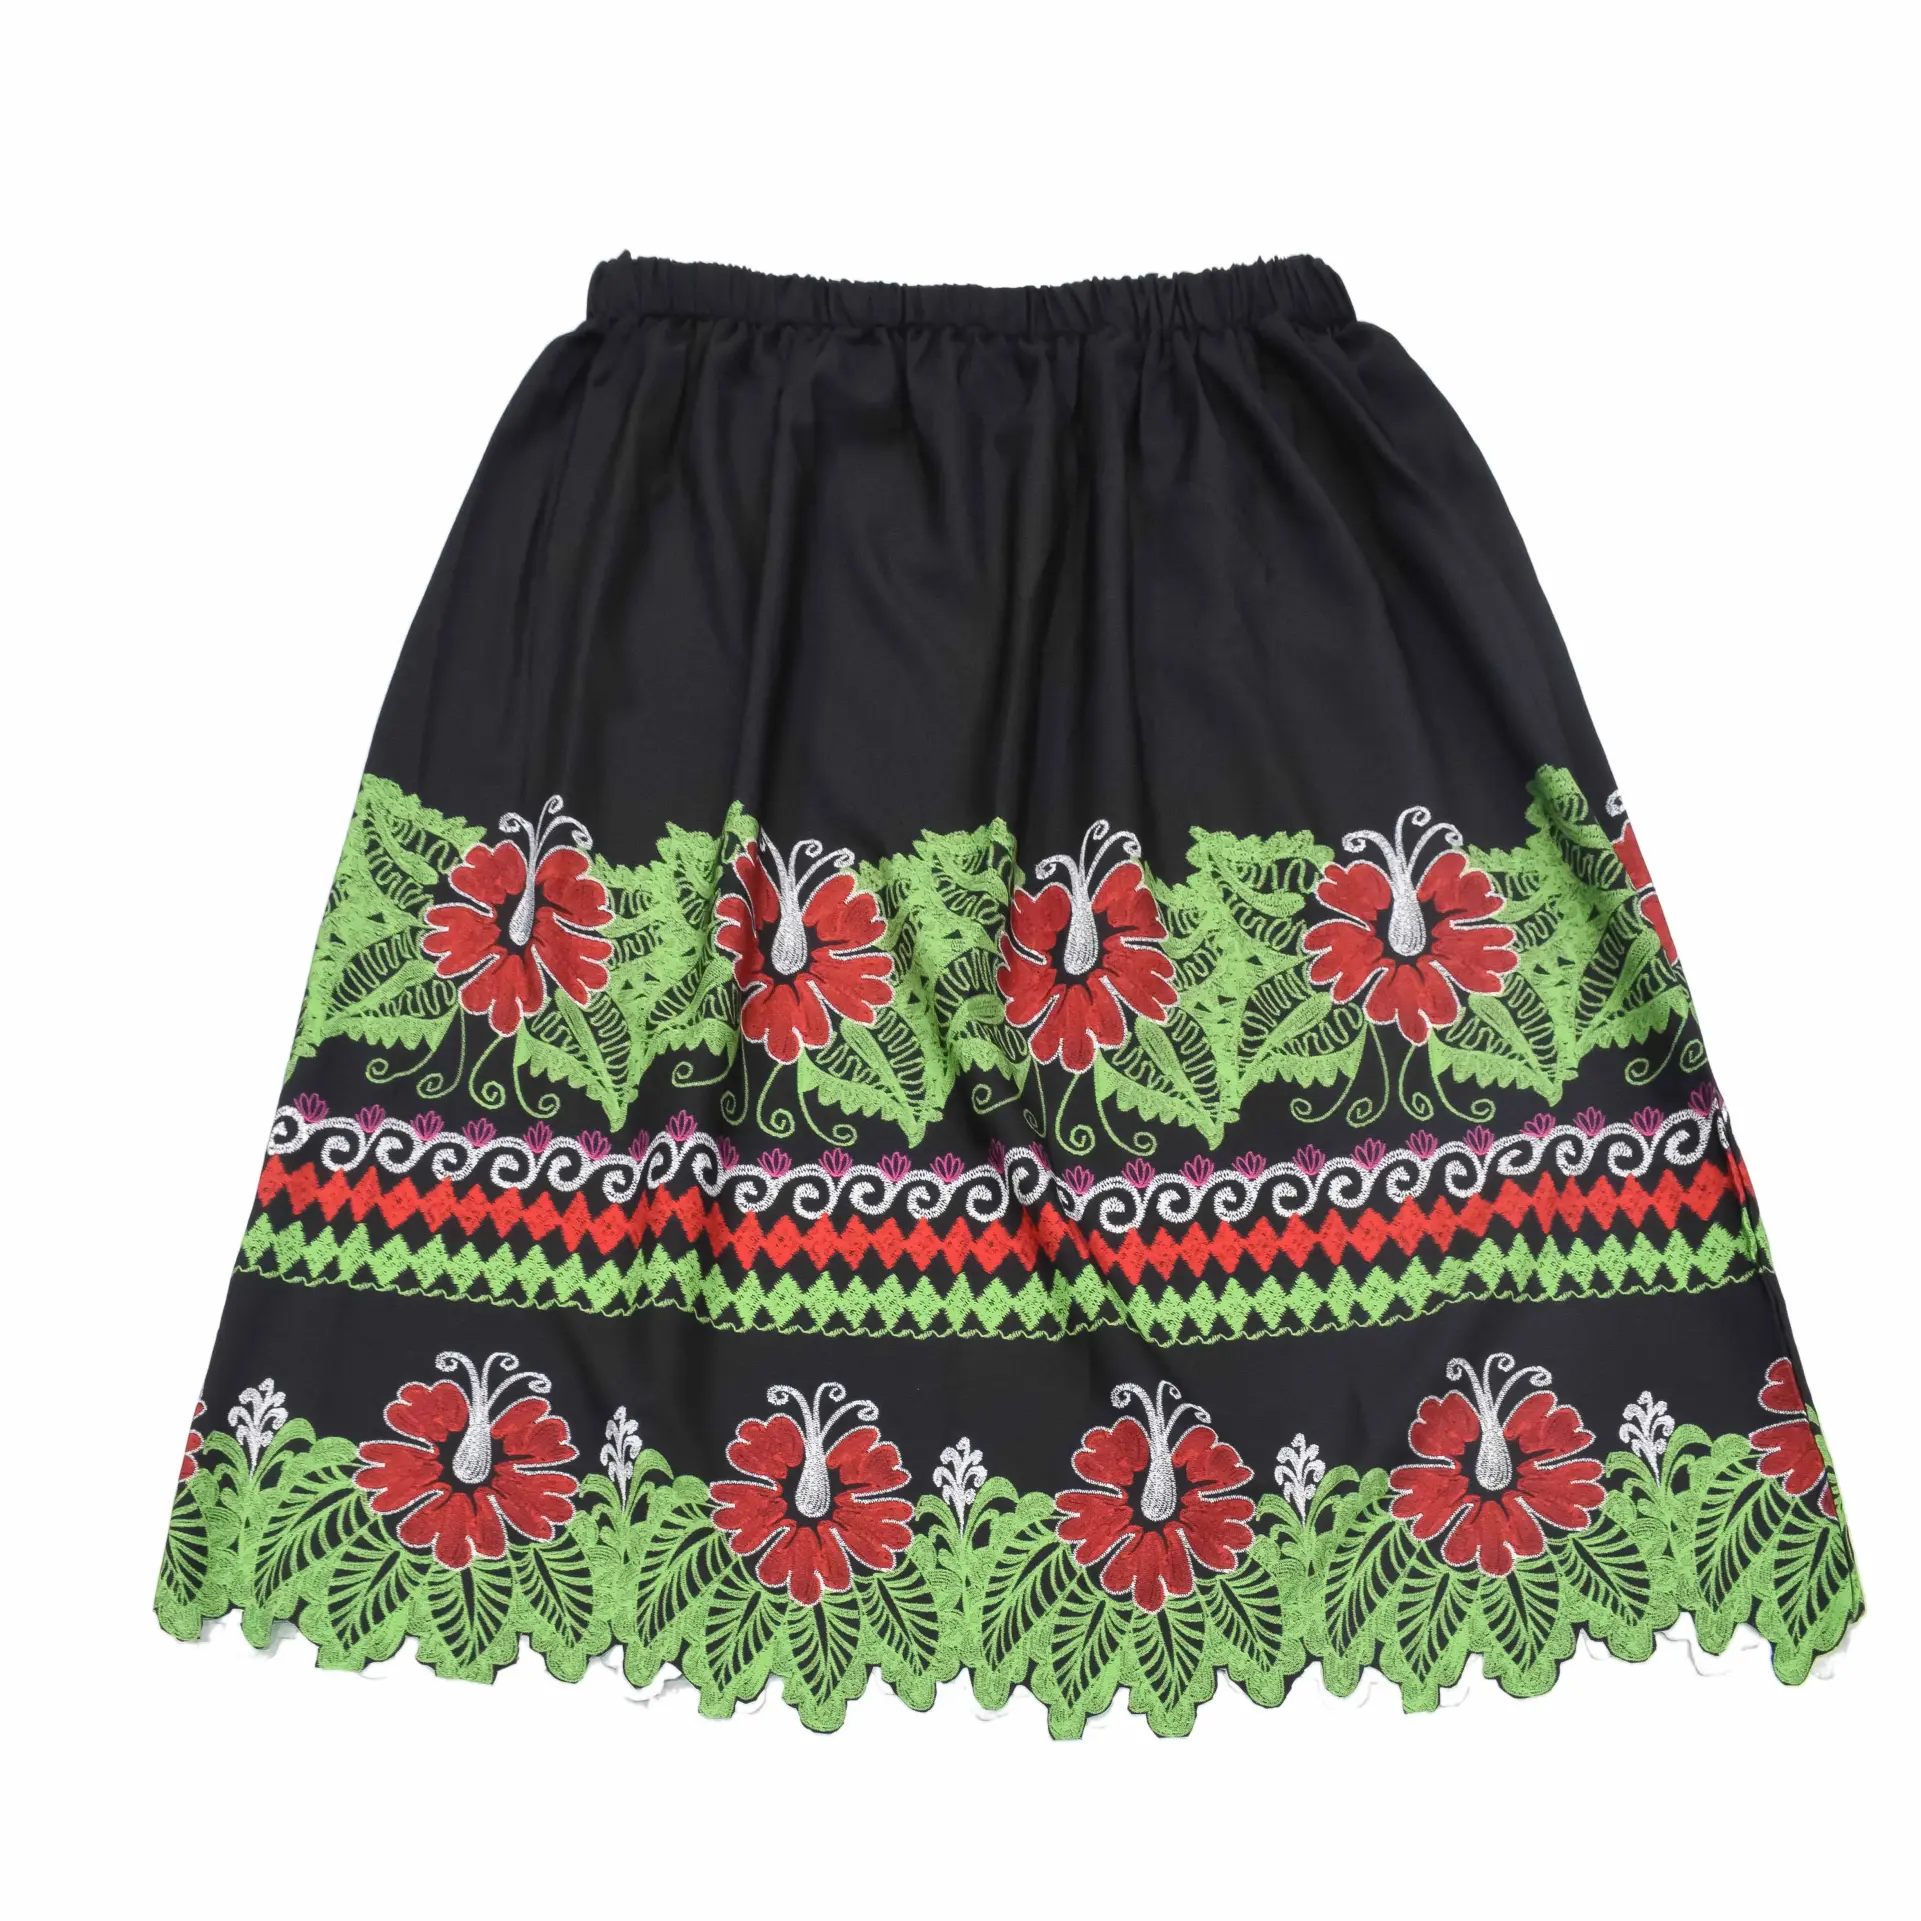 Custom Made Skirts For Women's High Quality Women's Casual Skirts New Style Women Skirts At Cheap Prices Manufacture In Pakistan